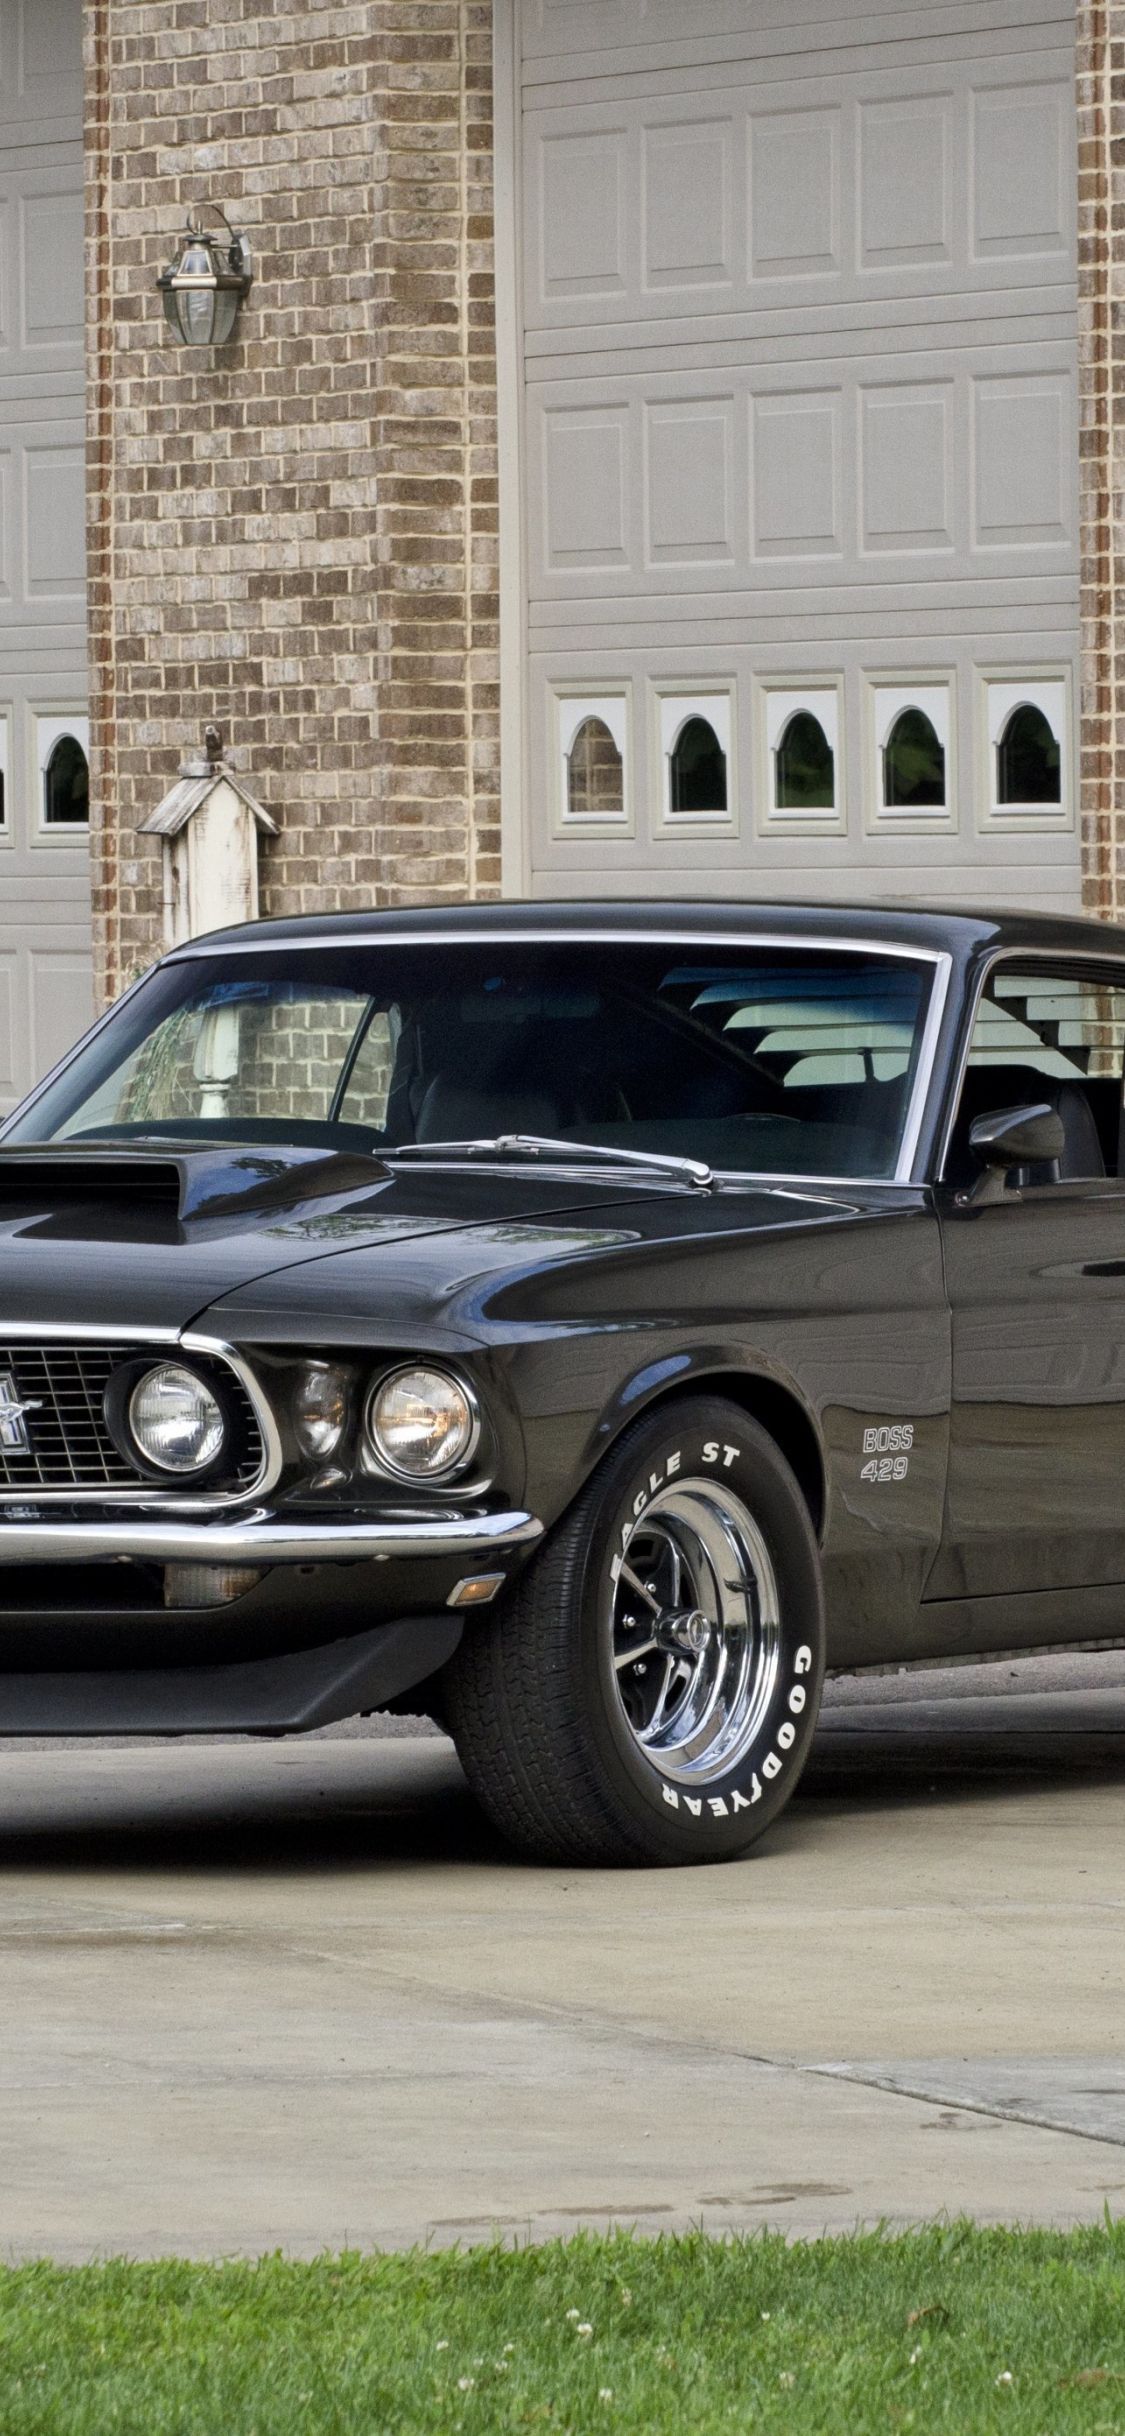 Download 1125x2436 wallpaper black, 1969 ford mustang boss iphone x 1125x2436 HD image, background, 9823